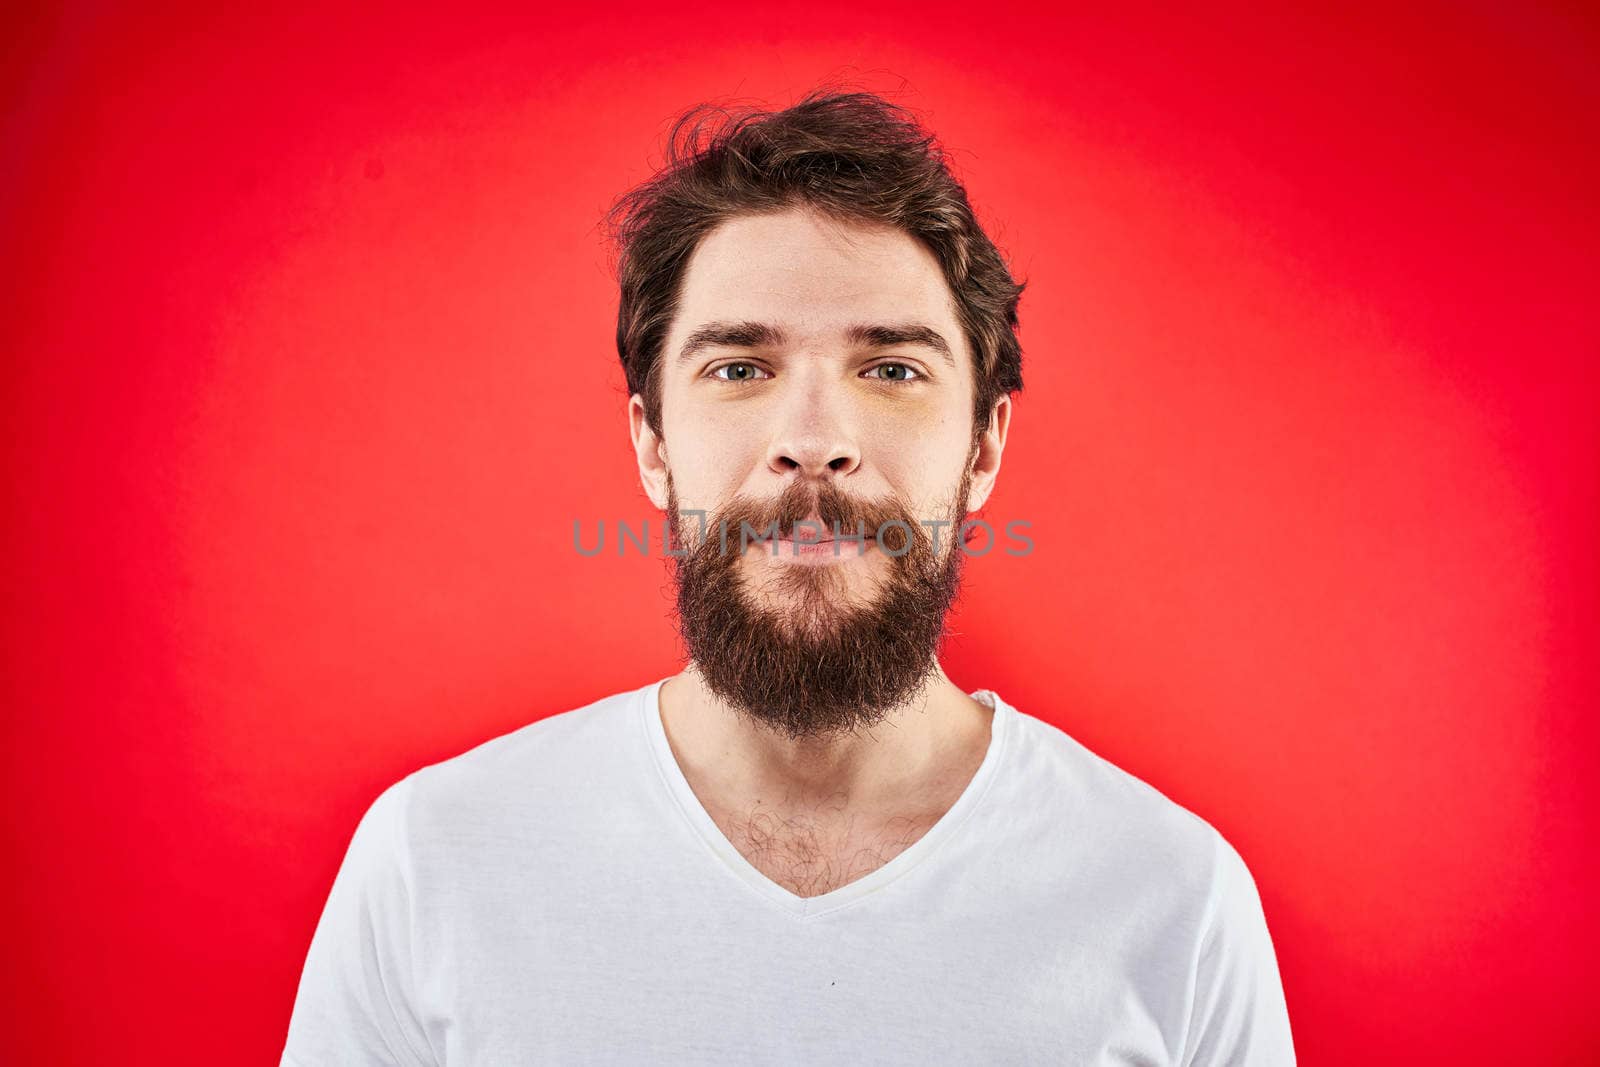 Bearded man fun emotions lifestyle cropped view white t-shirt red background by SHOTPRIME